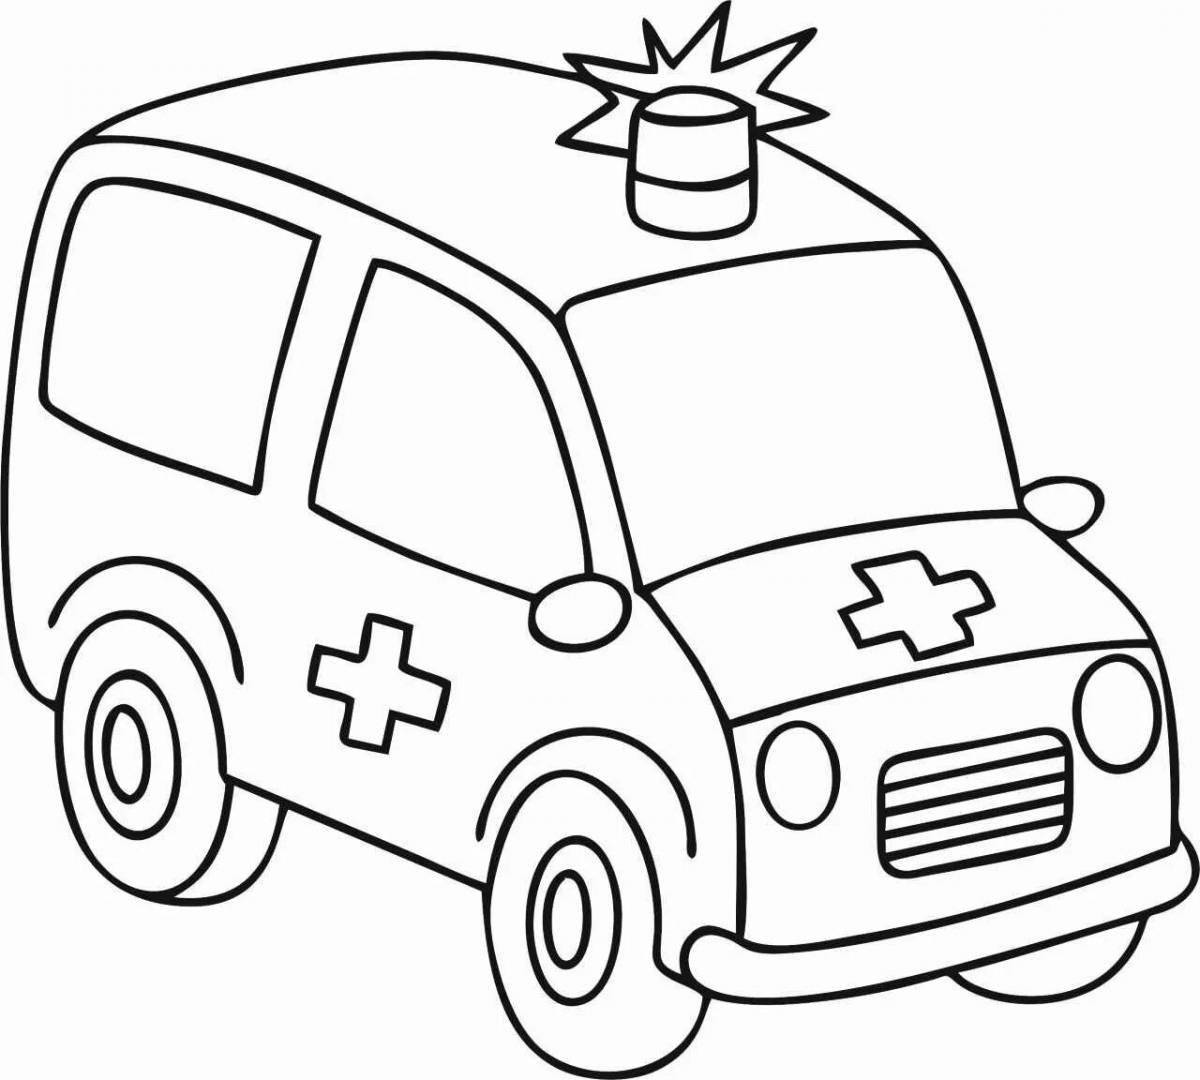 Coloring ambulance for boys